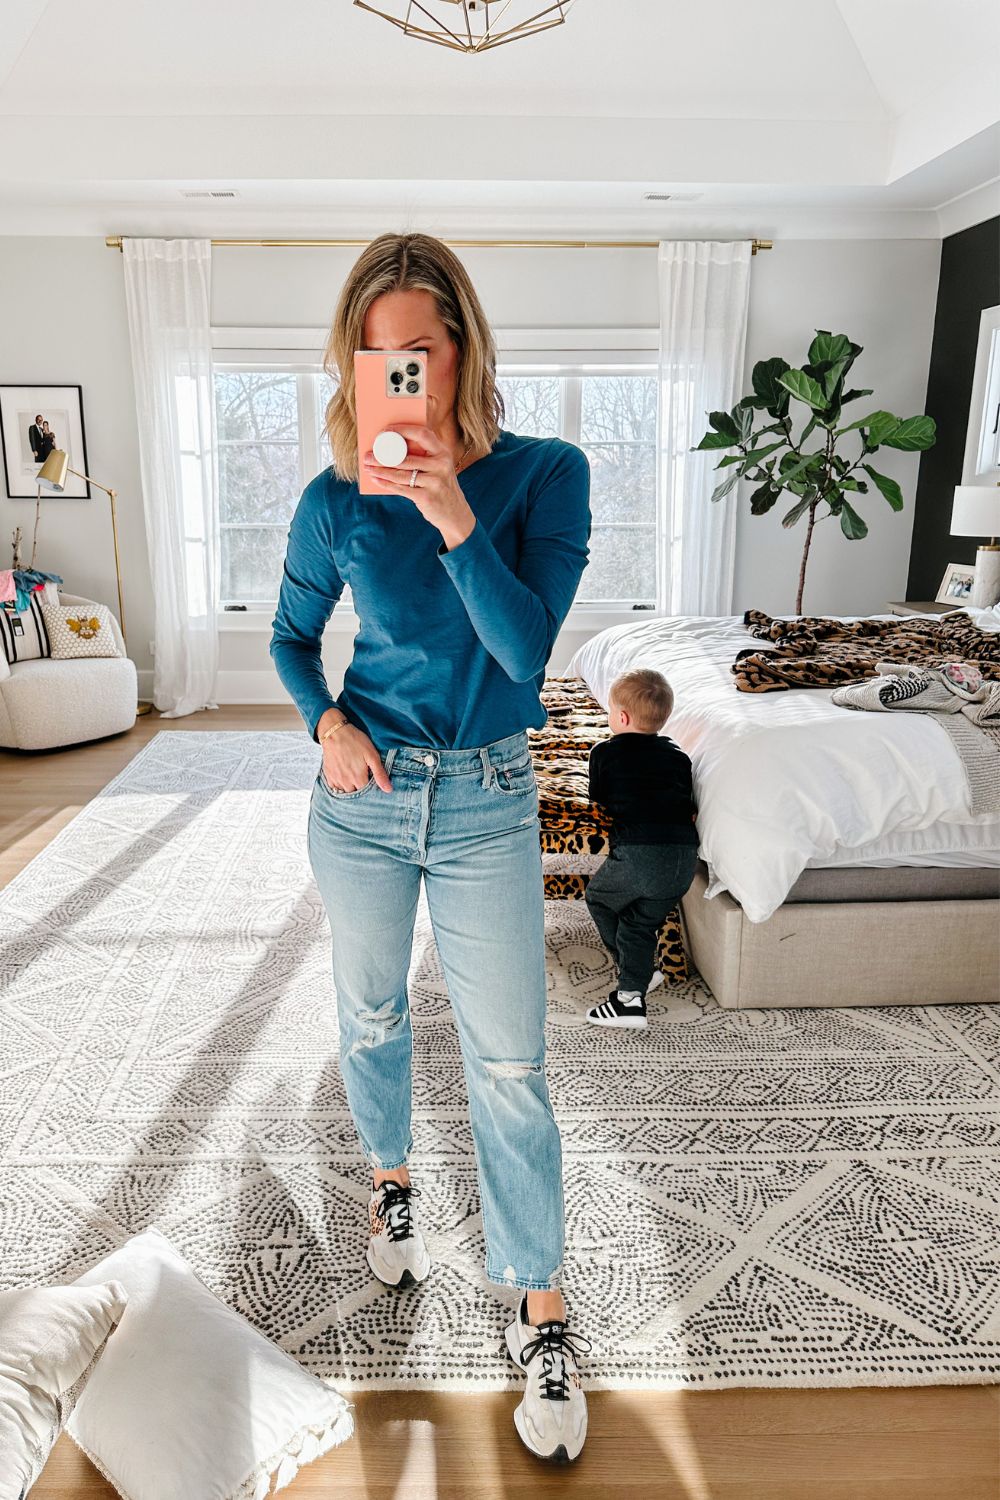 Suzanne wearing a long sleeve tee, jeans, and sneakers